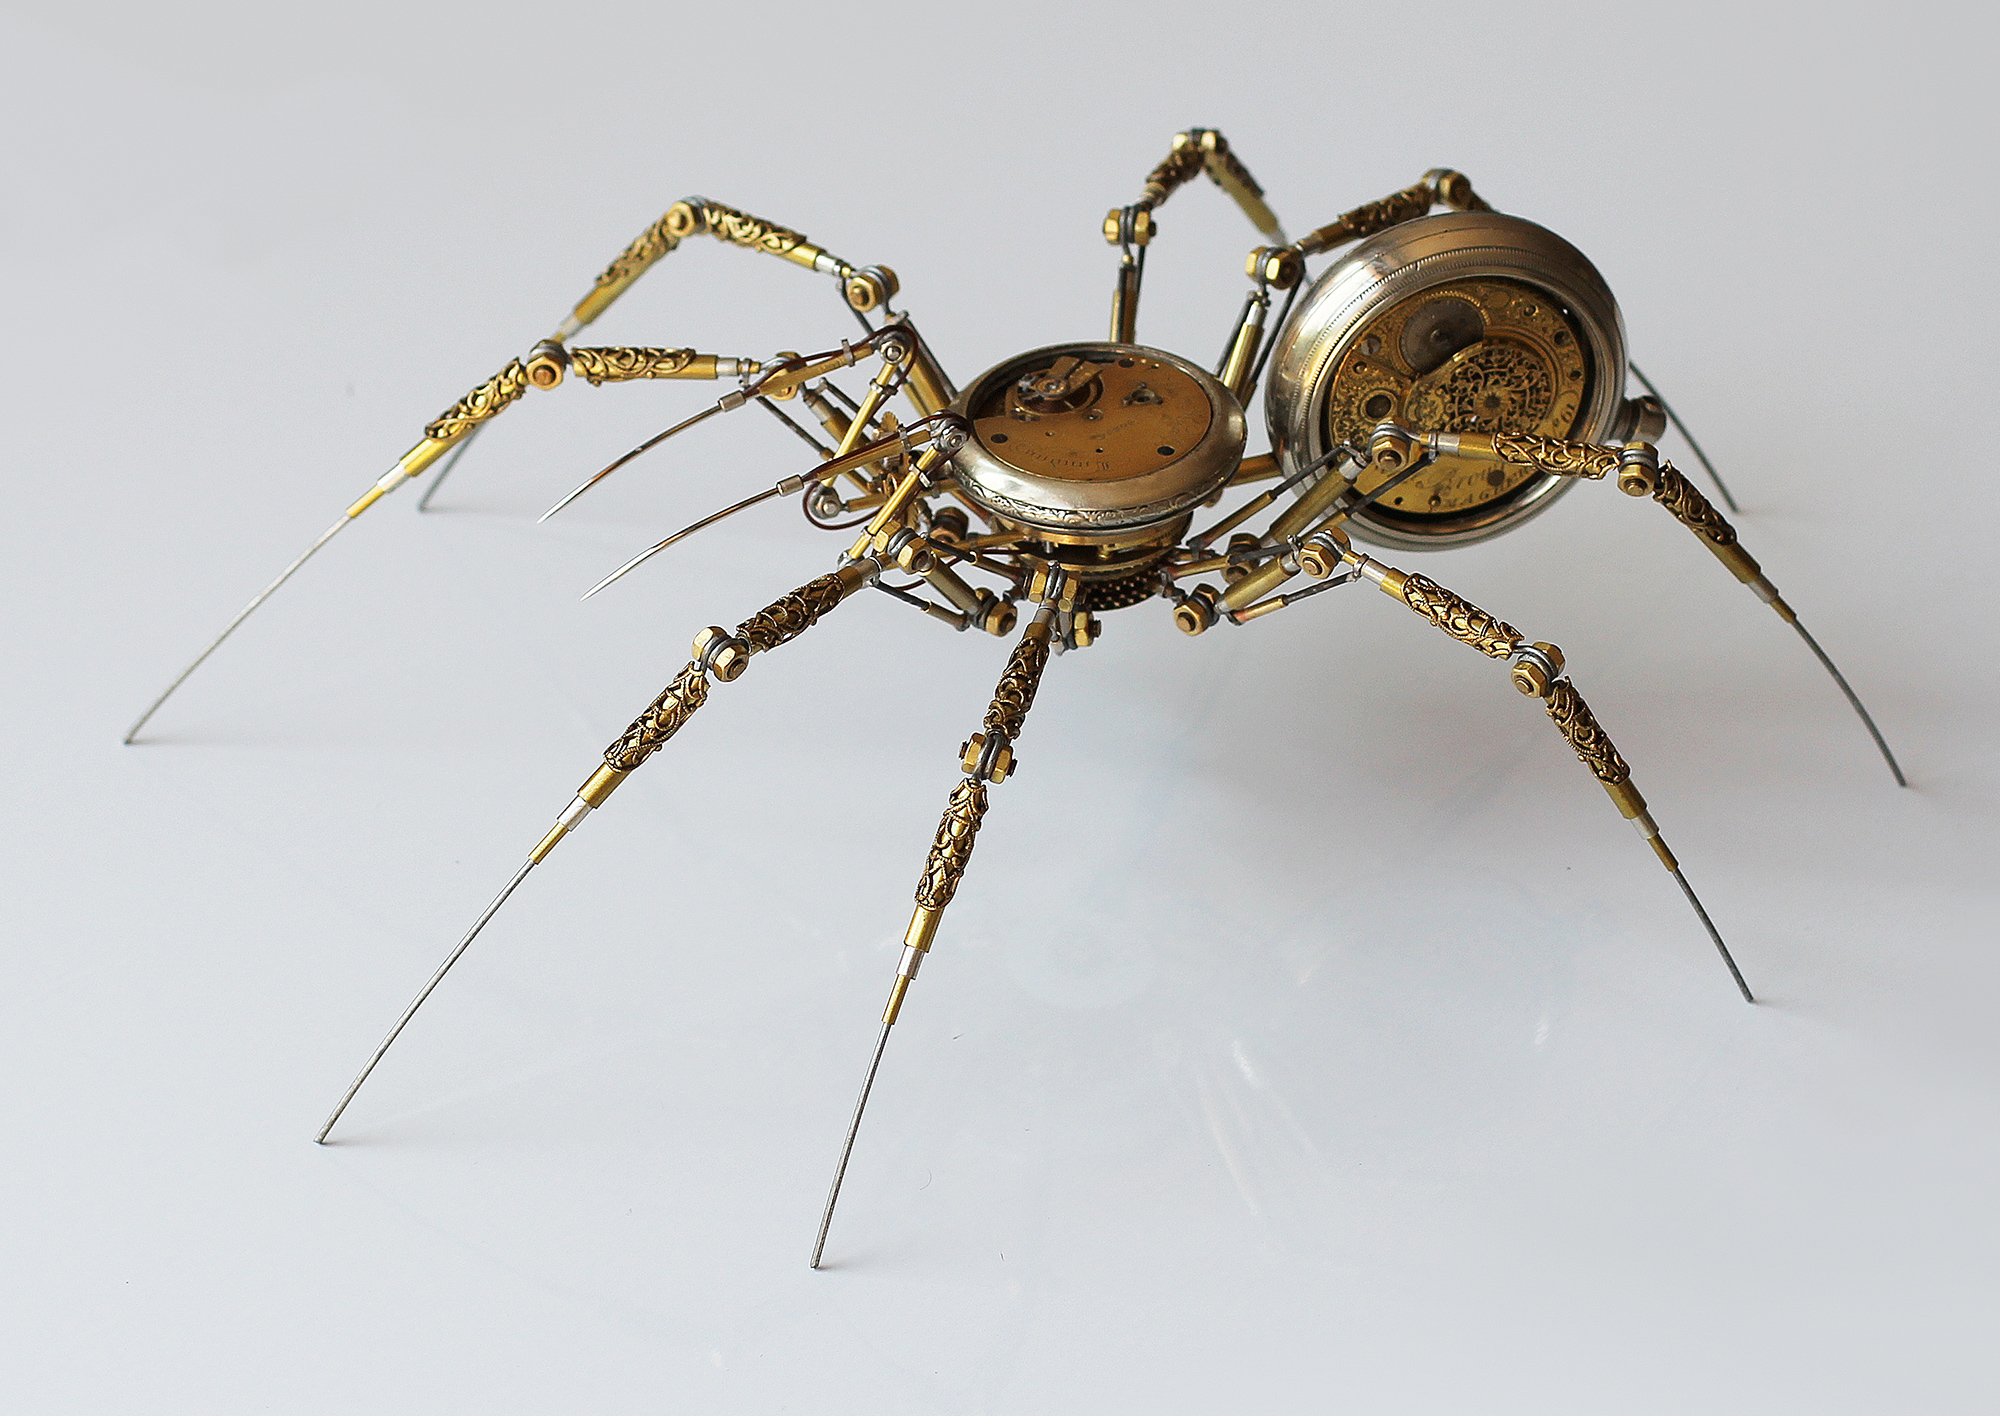 Antique Watches, Cameras, and Medical Equipment Morph Into Meticulous Steampunk Spiders | 国外美陈 美陈网站 美陈前沿 